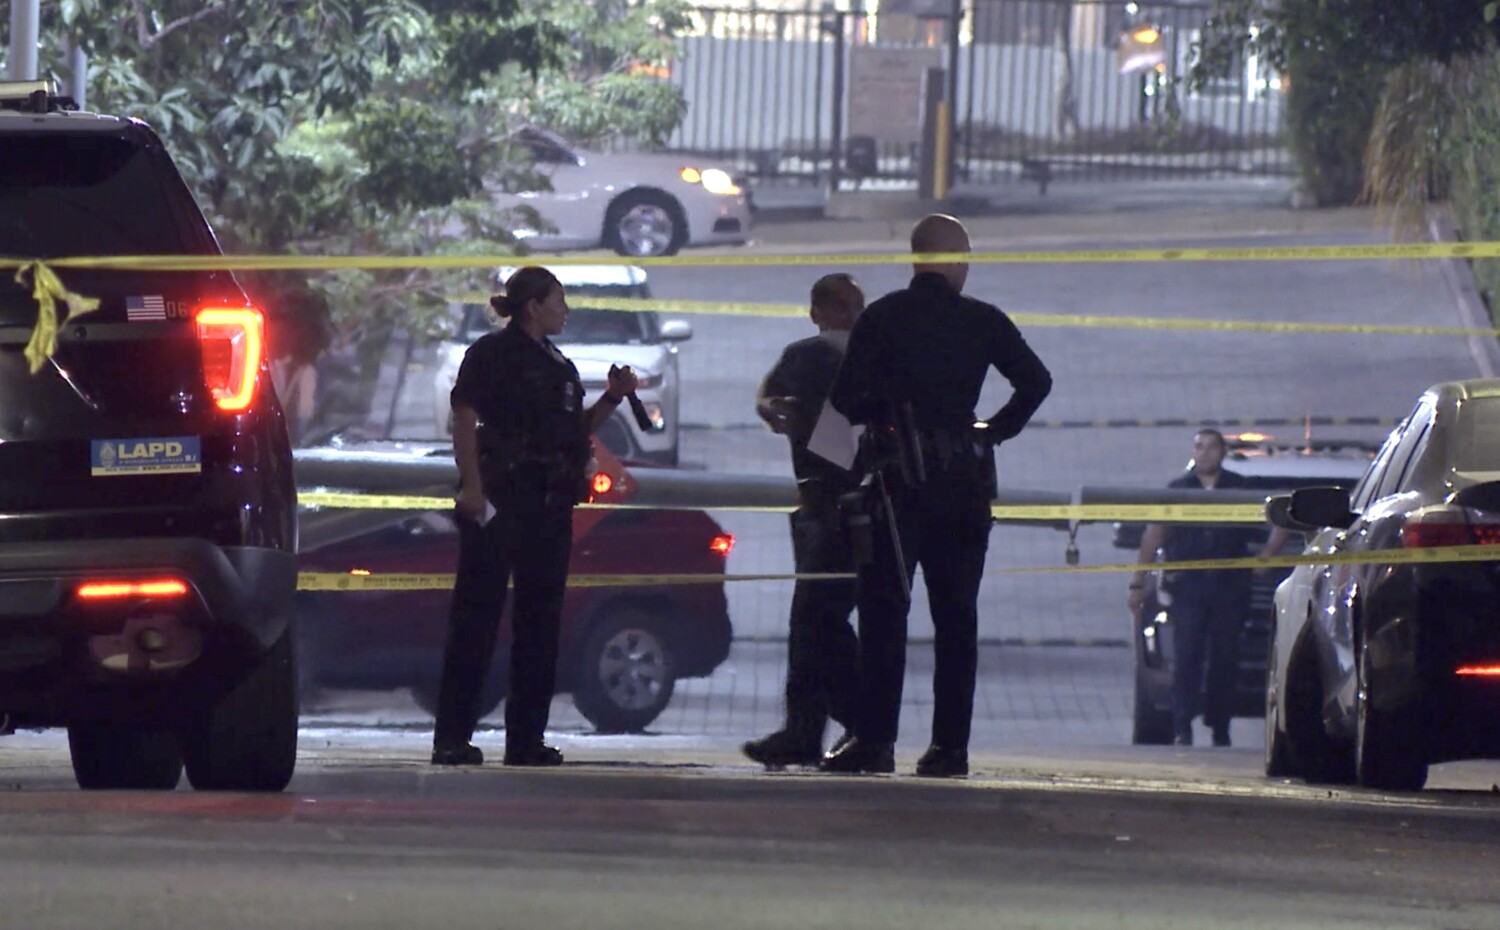 Shooting suspect and victims are identified in Hollywood double homicide